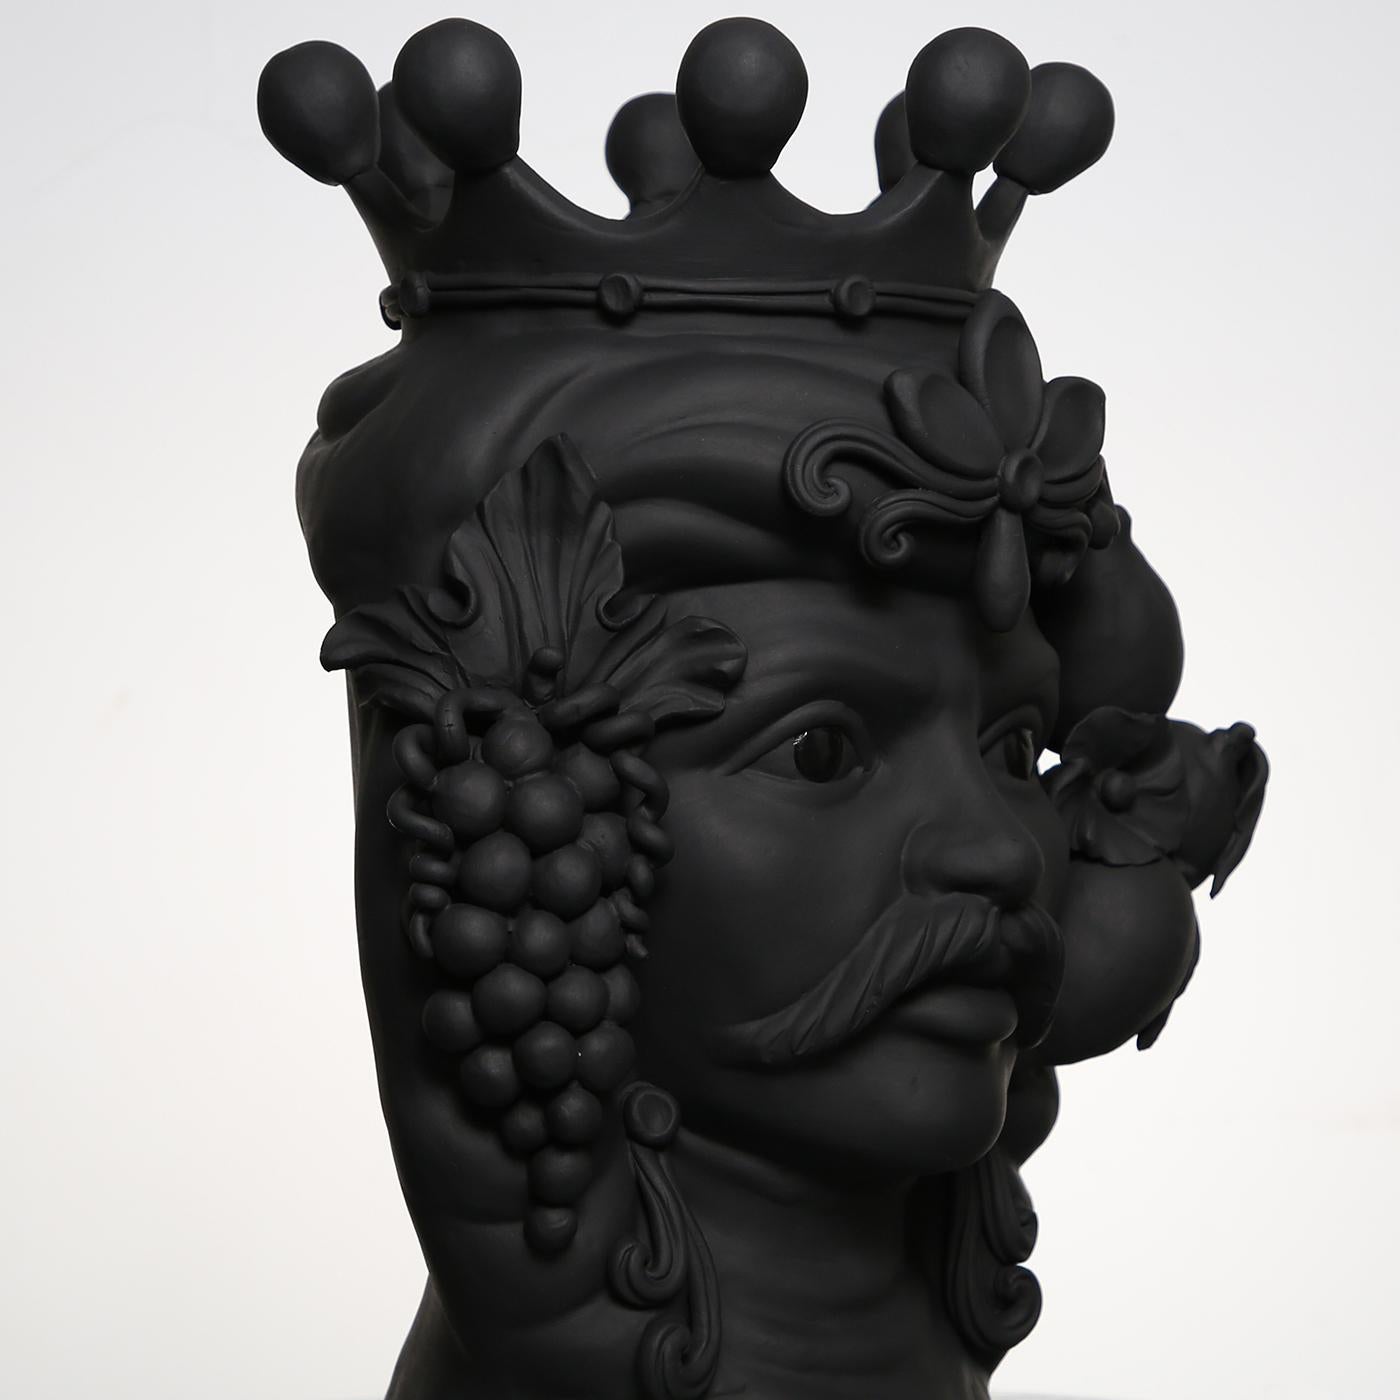 This anthropomorphic vase is made entirely by hand and painted in a black matte monochrome tint, rich in natural pigments and resin binders that provide intense color depth. Only the eyes are glazed so they stand out, emphasizing the beauty of the